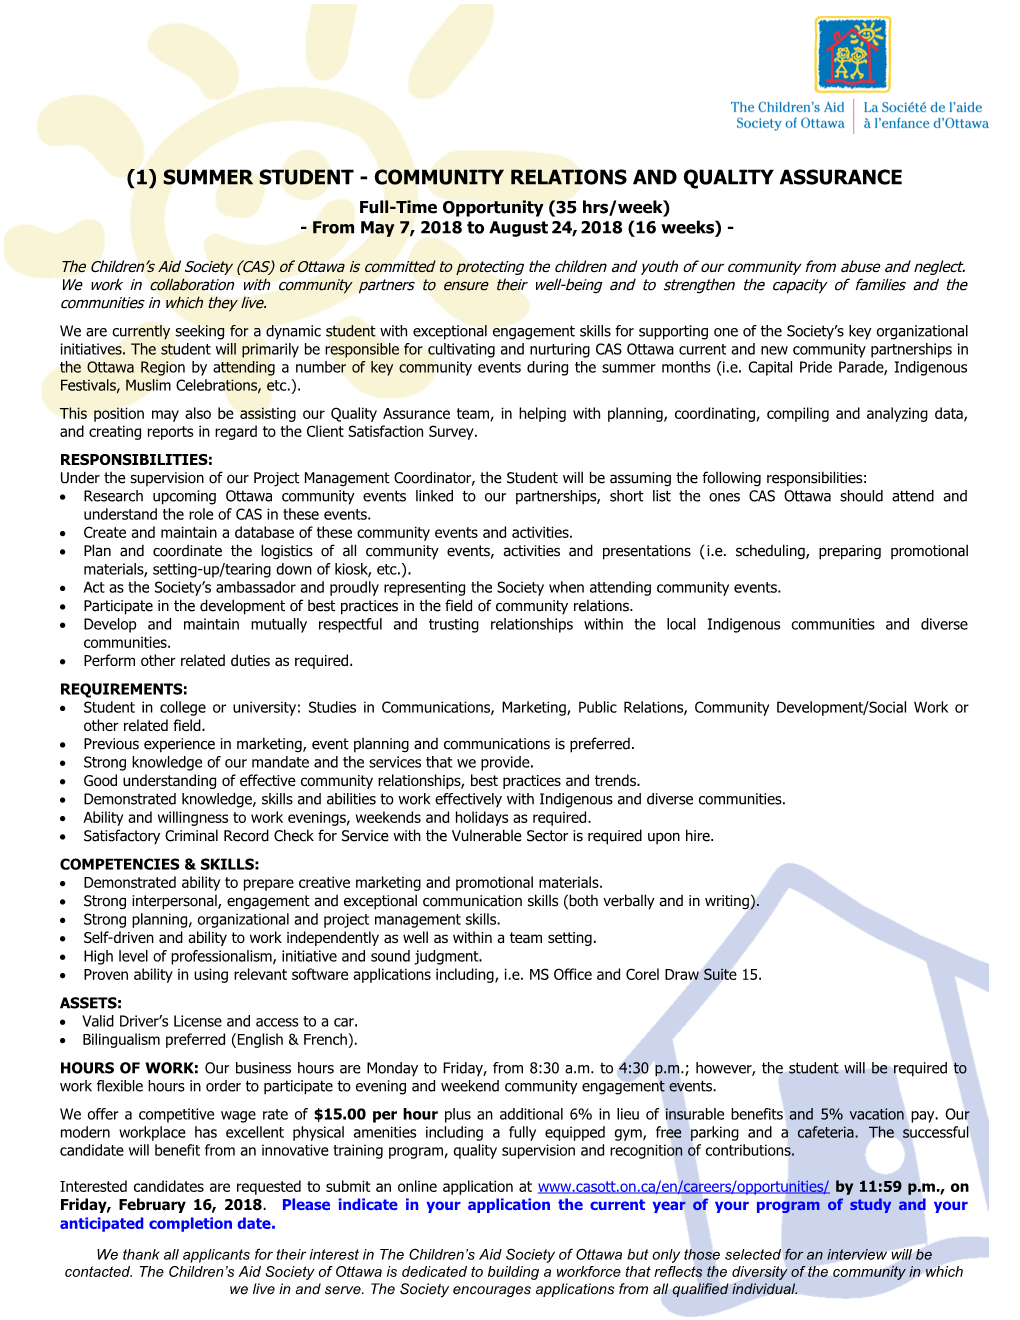 (1) Summer Student - Community Relations and Quality Assurance